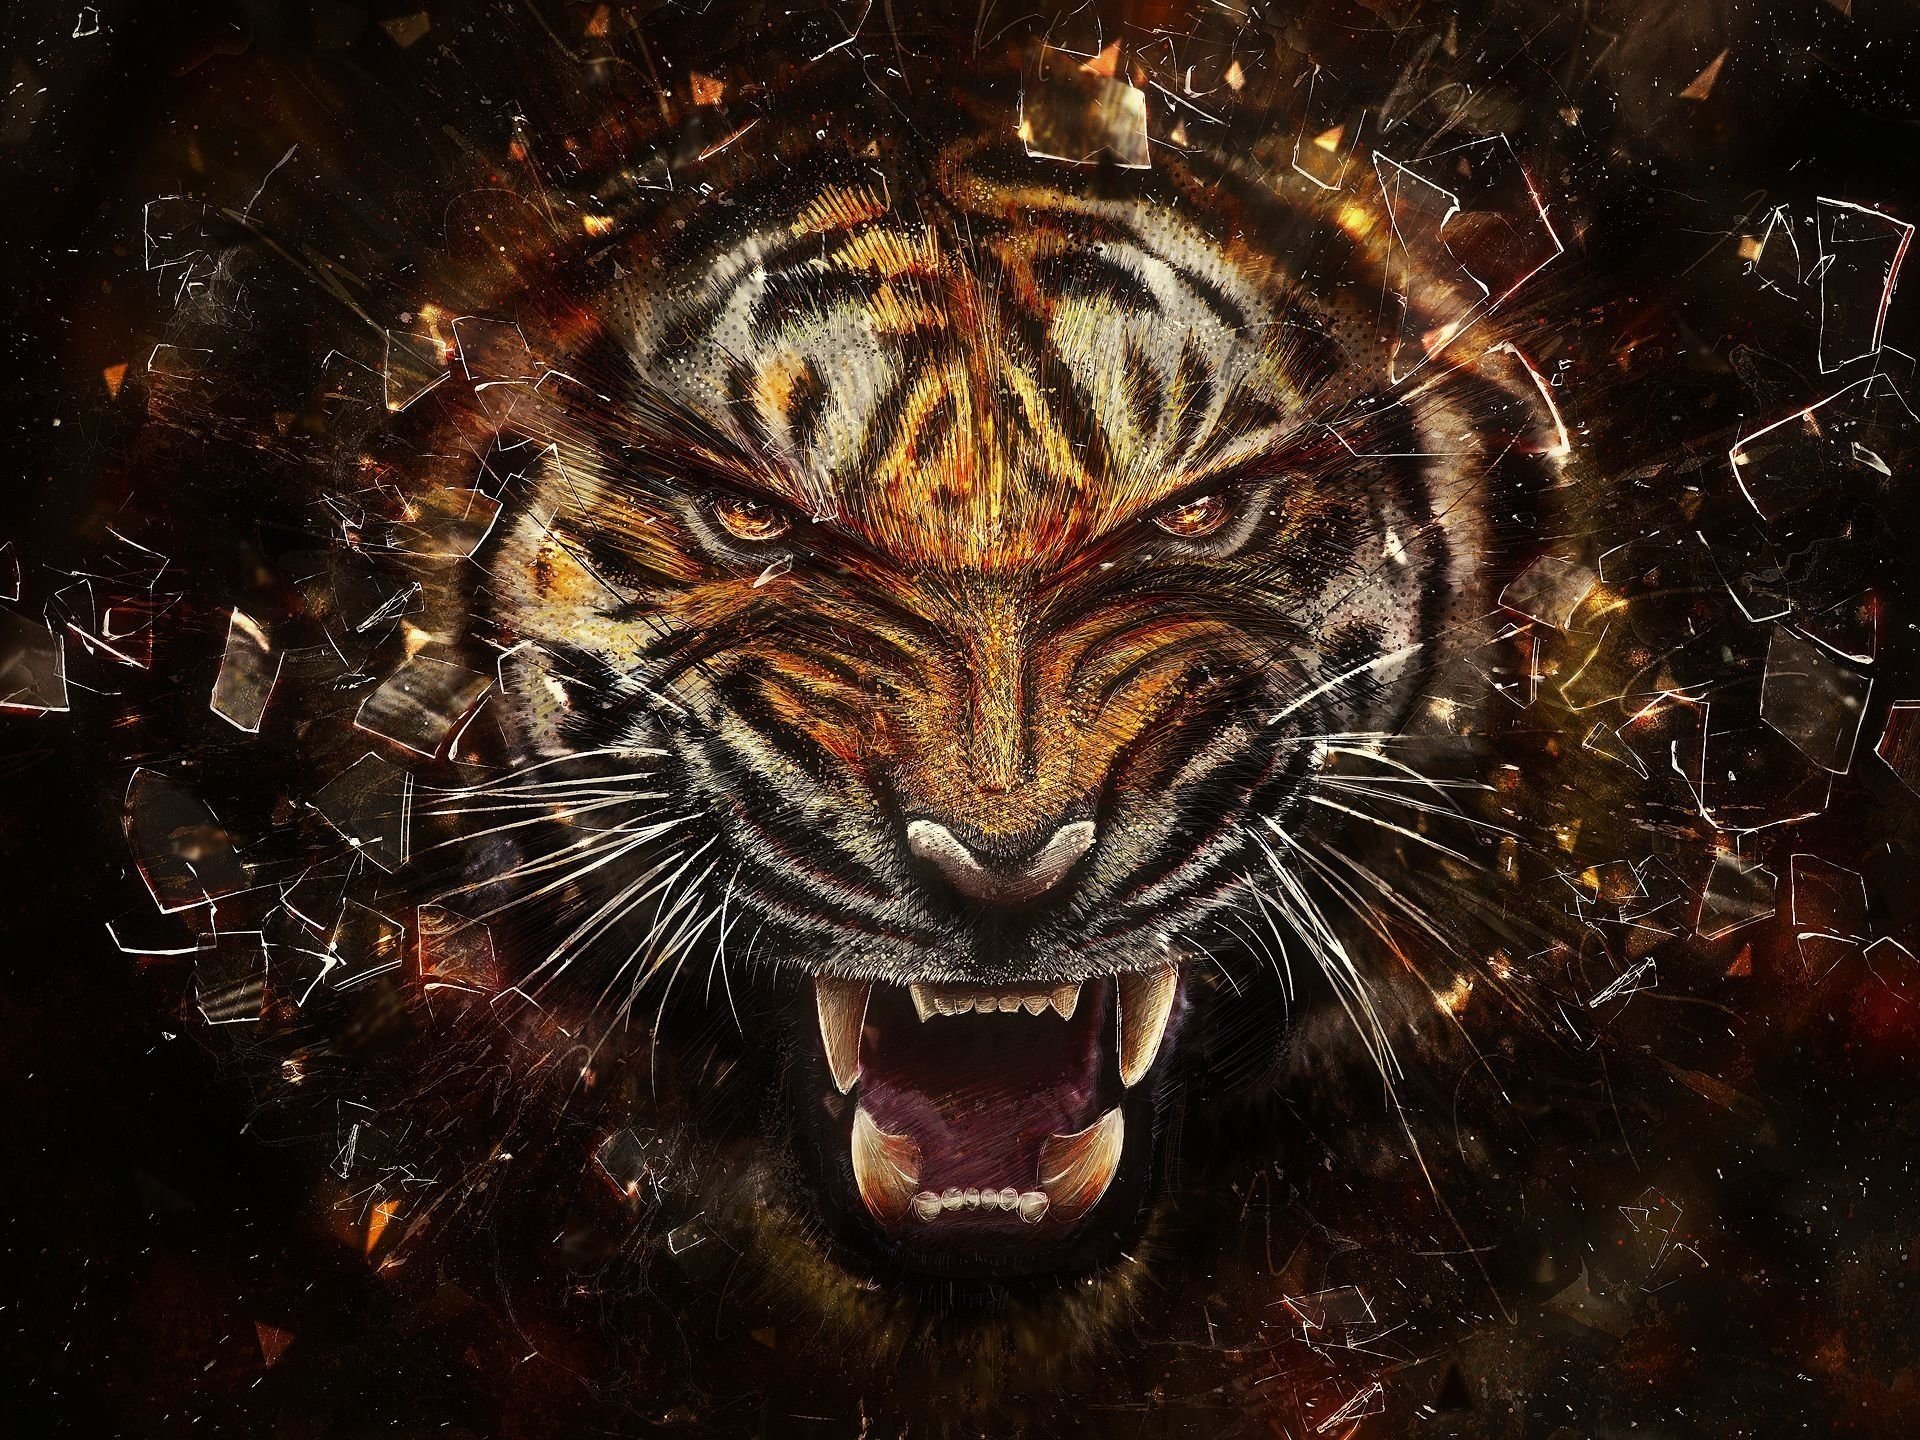 Cool Wallpapers of Tigers 54 images